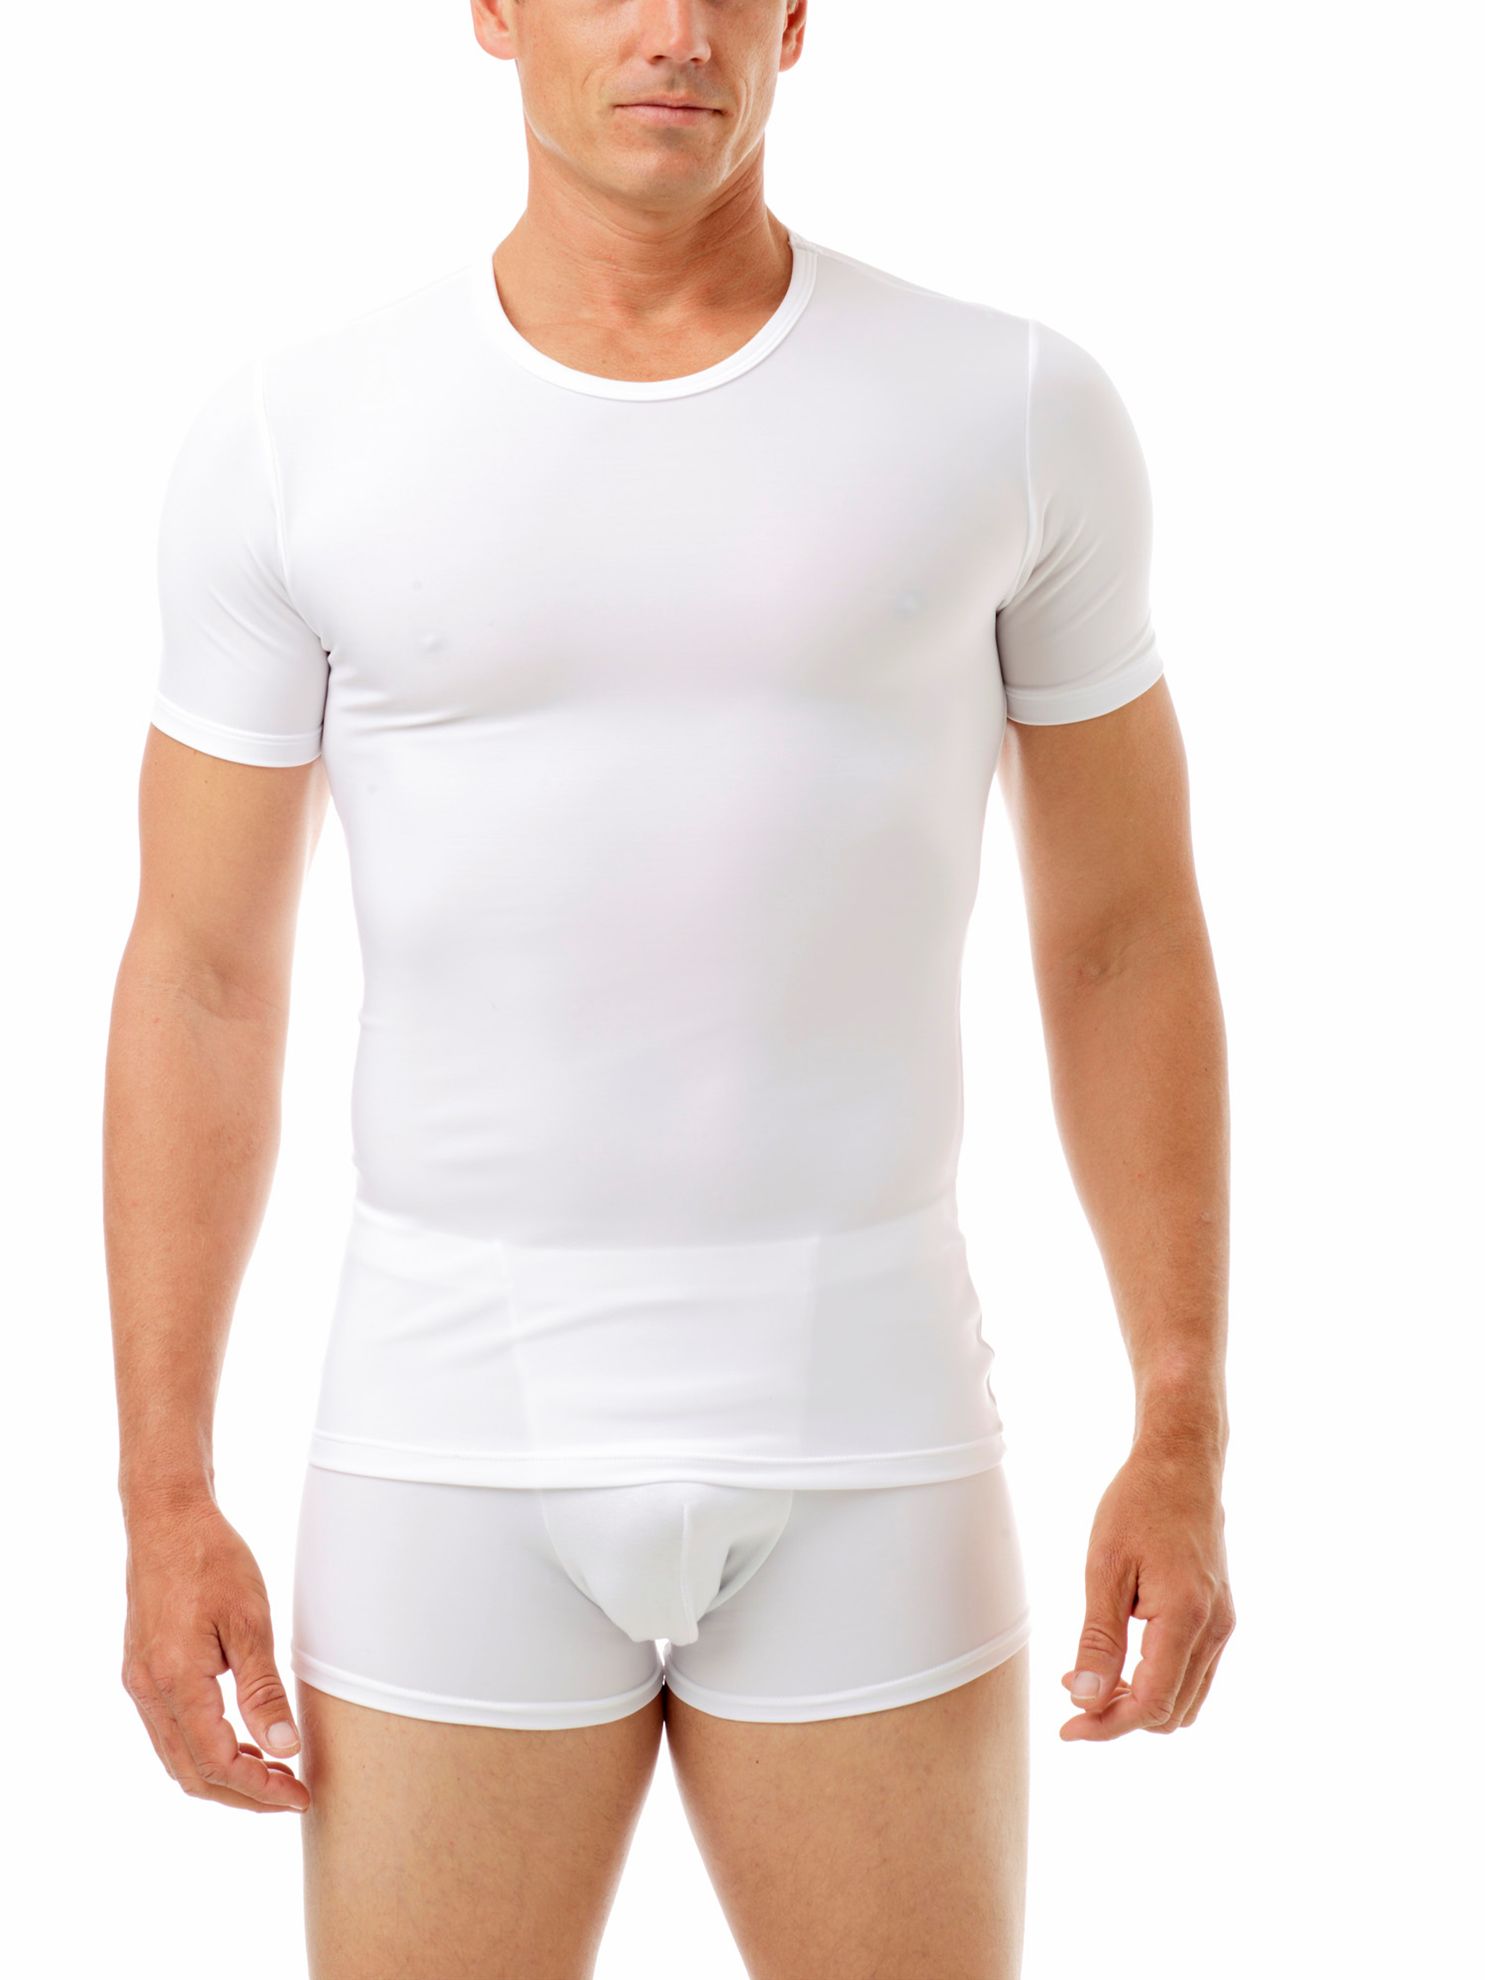 Athletic Works Adult Compression Crewneck Tee, Large, White